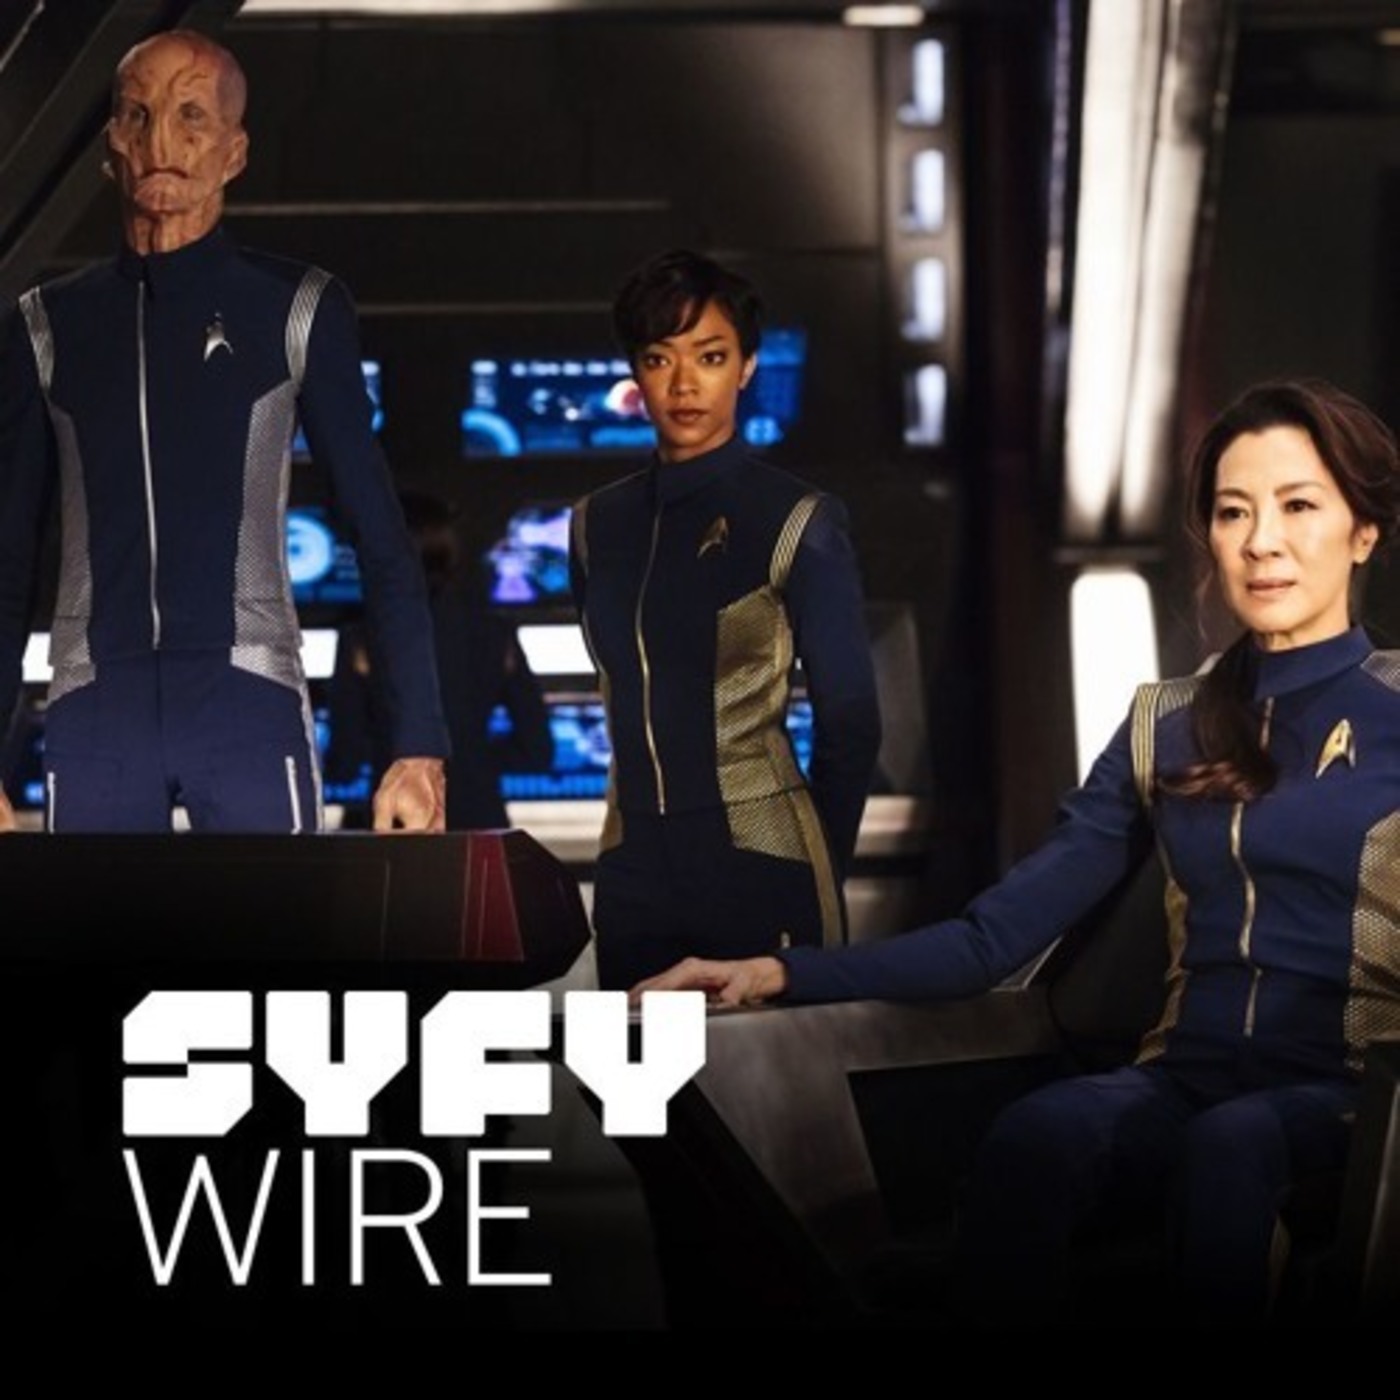 Who Won the Week Episode 82: Star Trek: Discovery, Inhumans, Jumanji, and more! by Syfy Wire